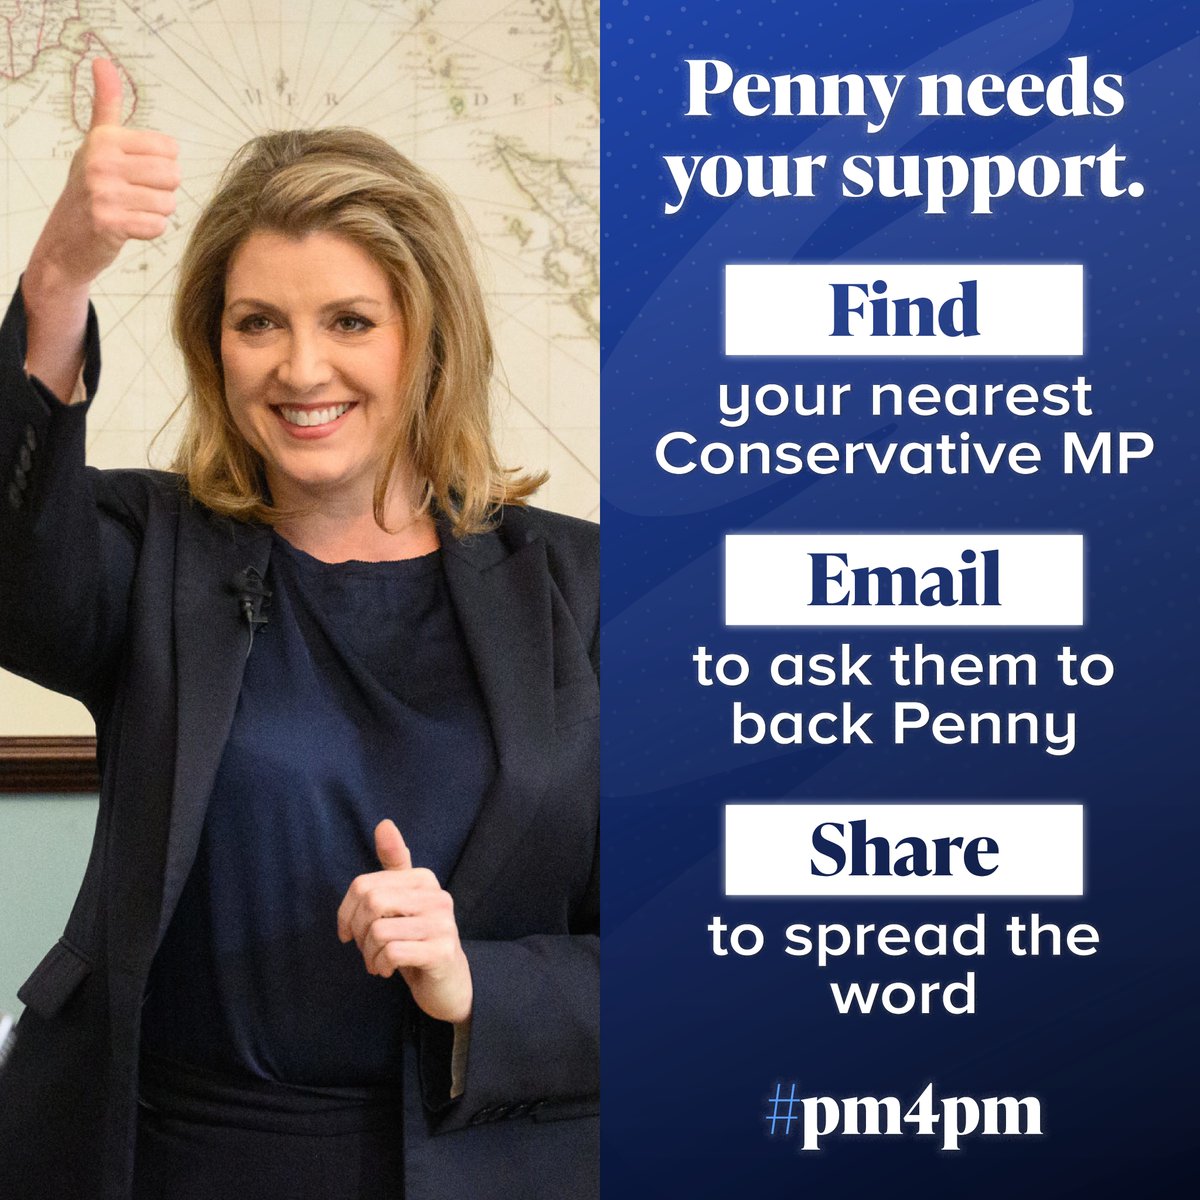 Penny needs your support 👇 ✅ Find your nearest Conservative MP ✅ Email to ask them to back Penny ✅ Share to spread the word #PM4PM